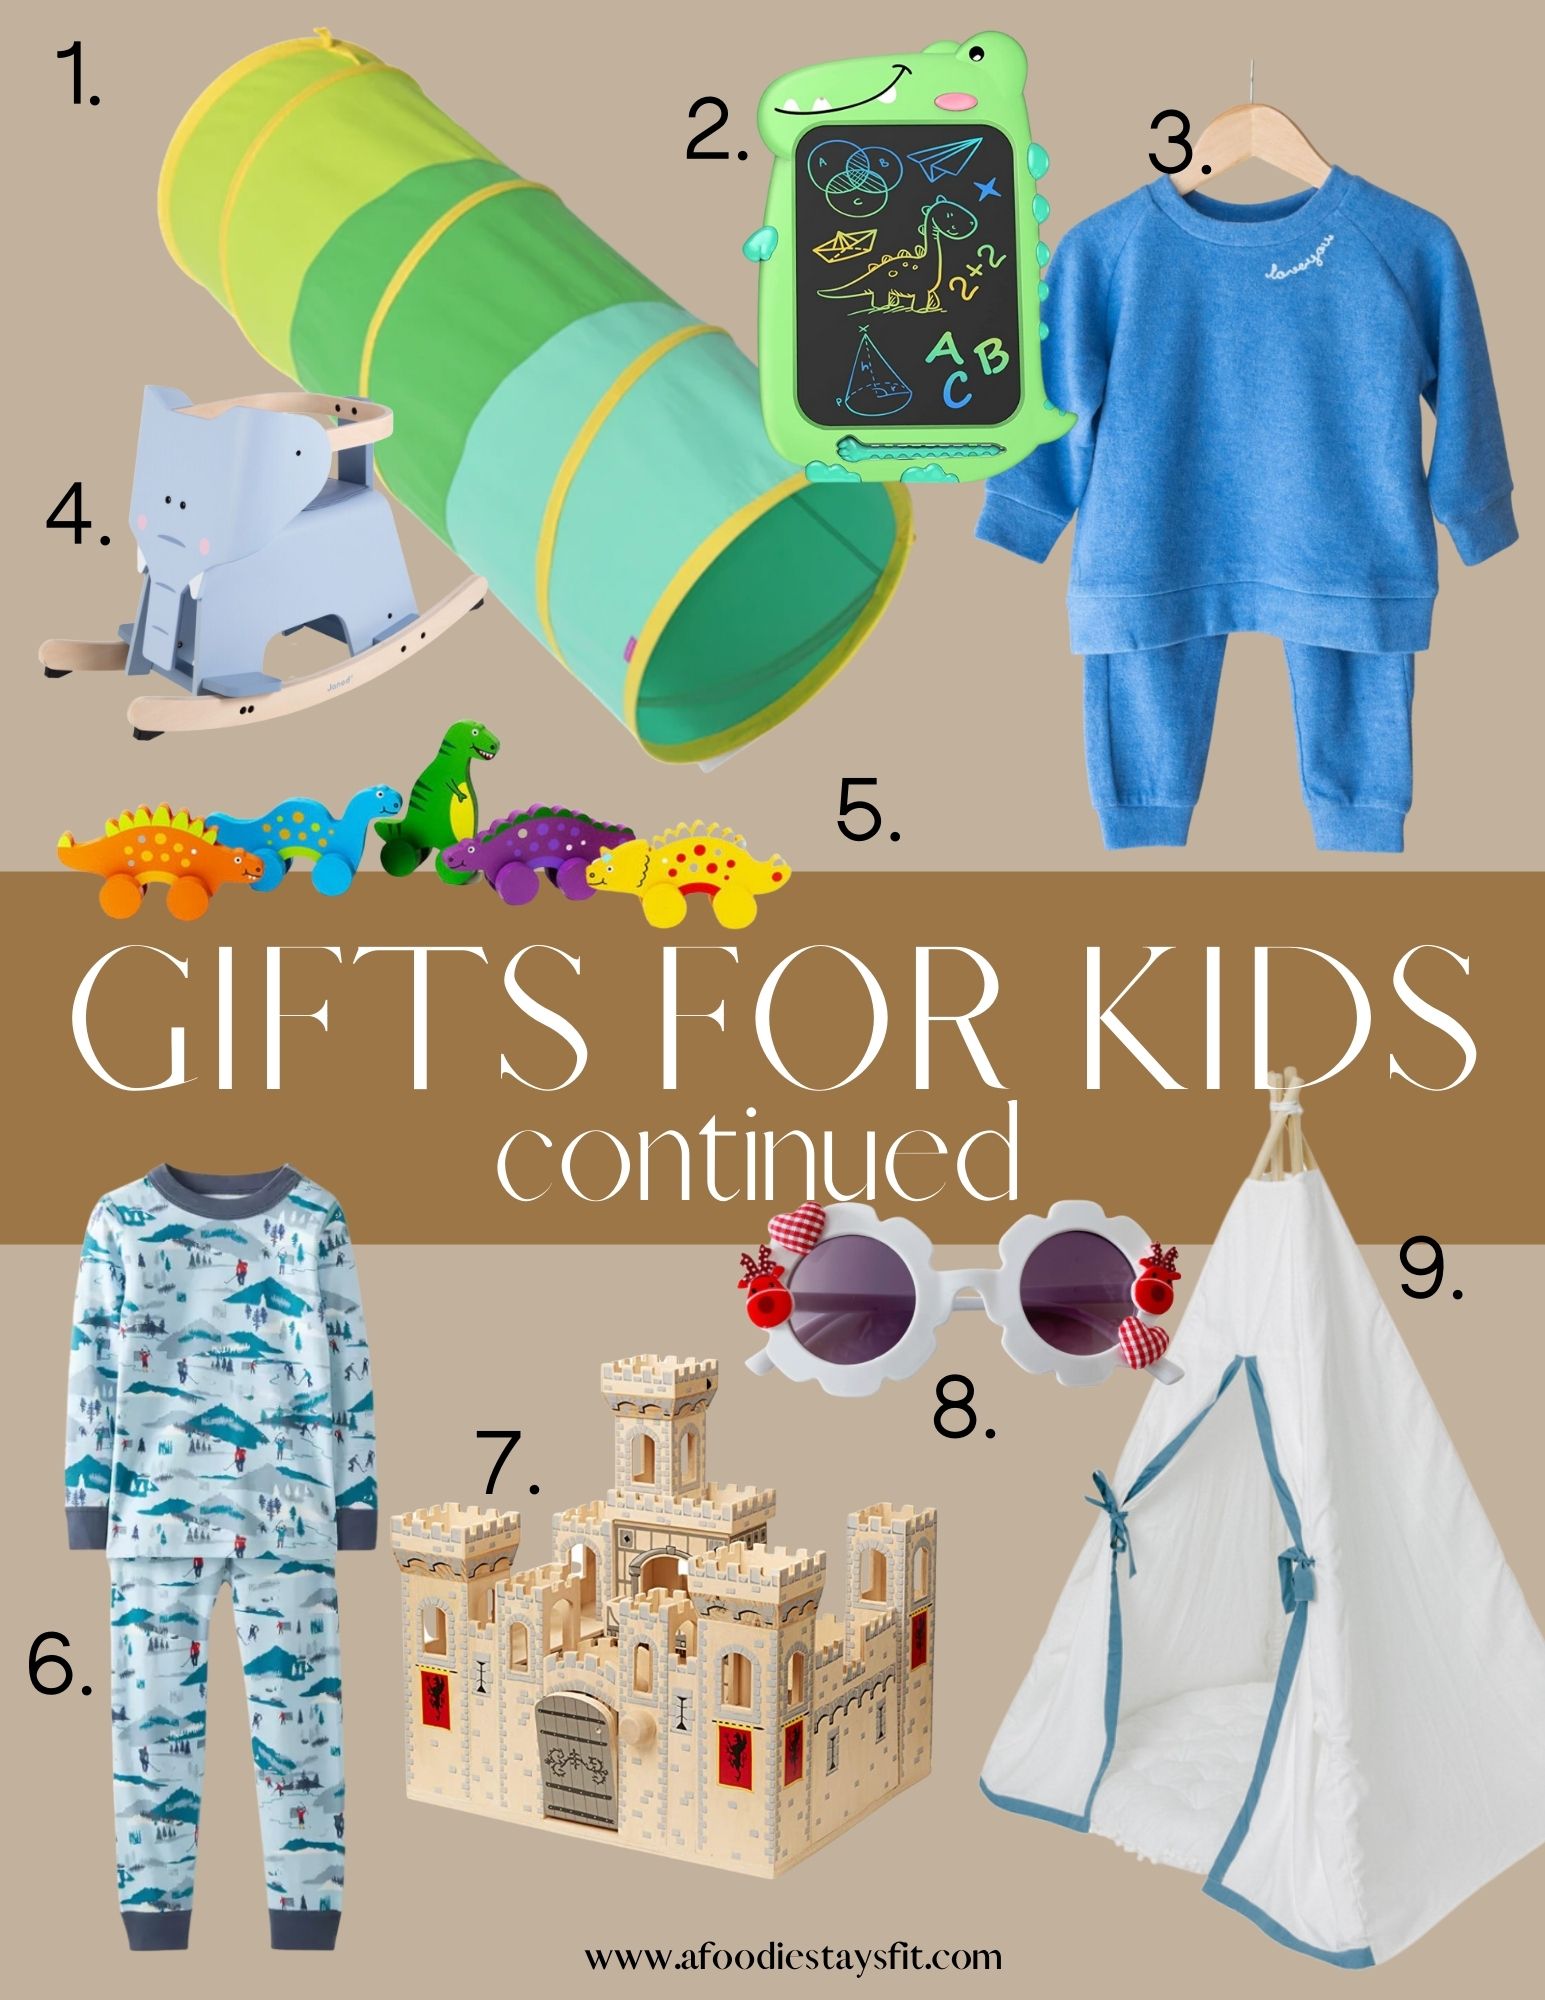 Kids gift ideas - 2022 Gift Guides